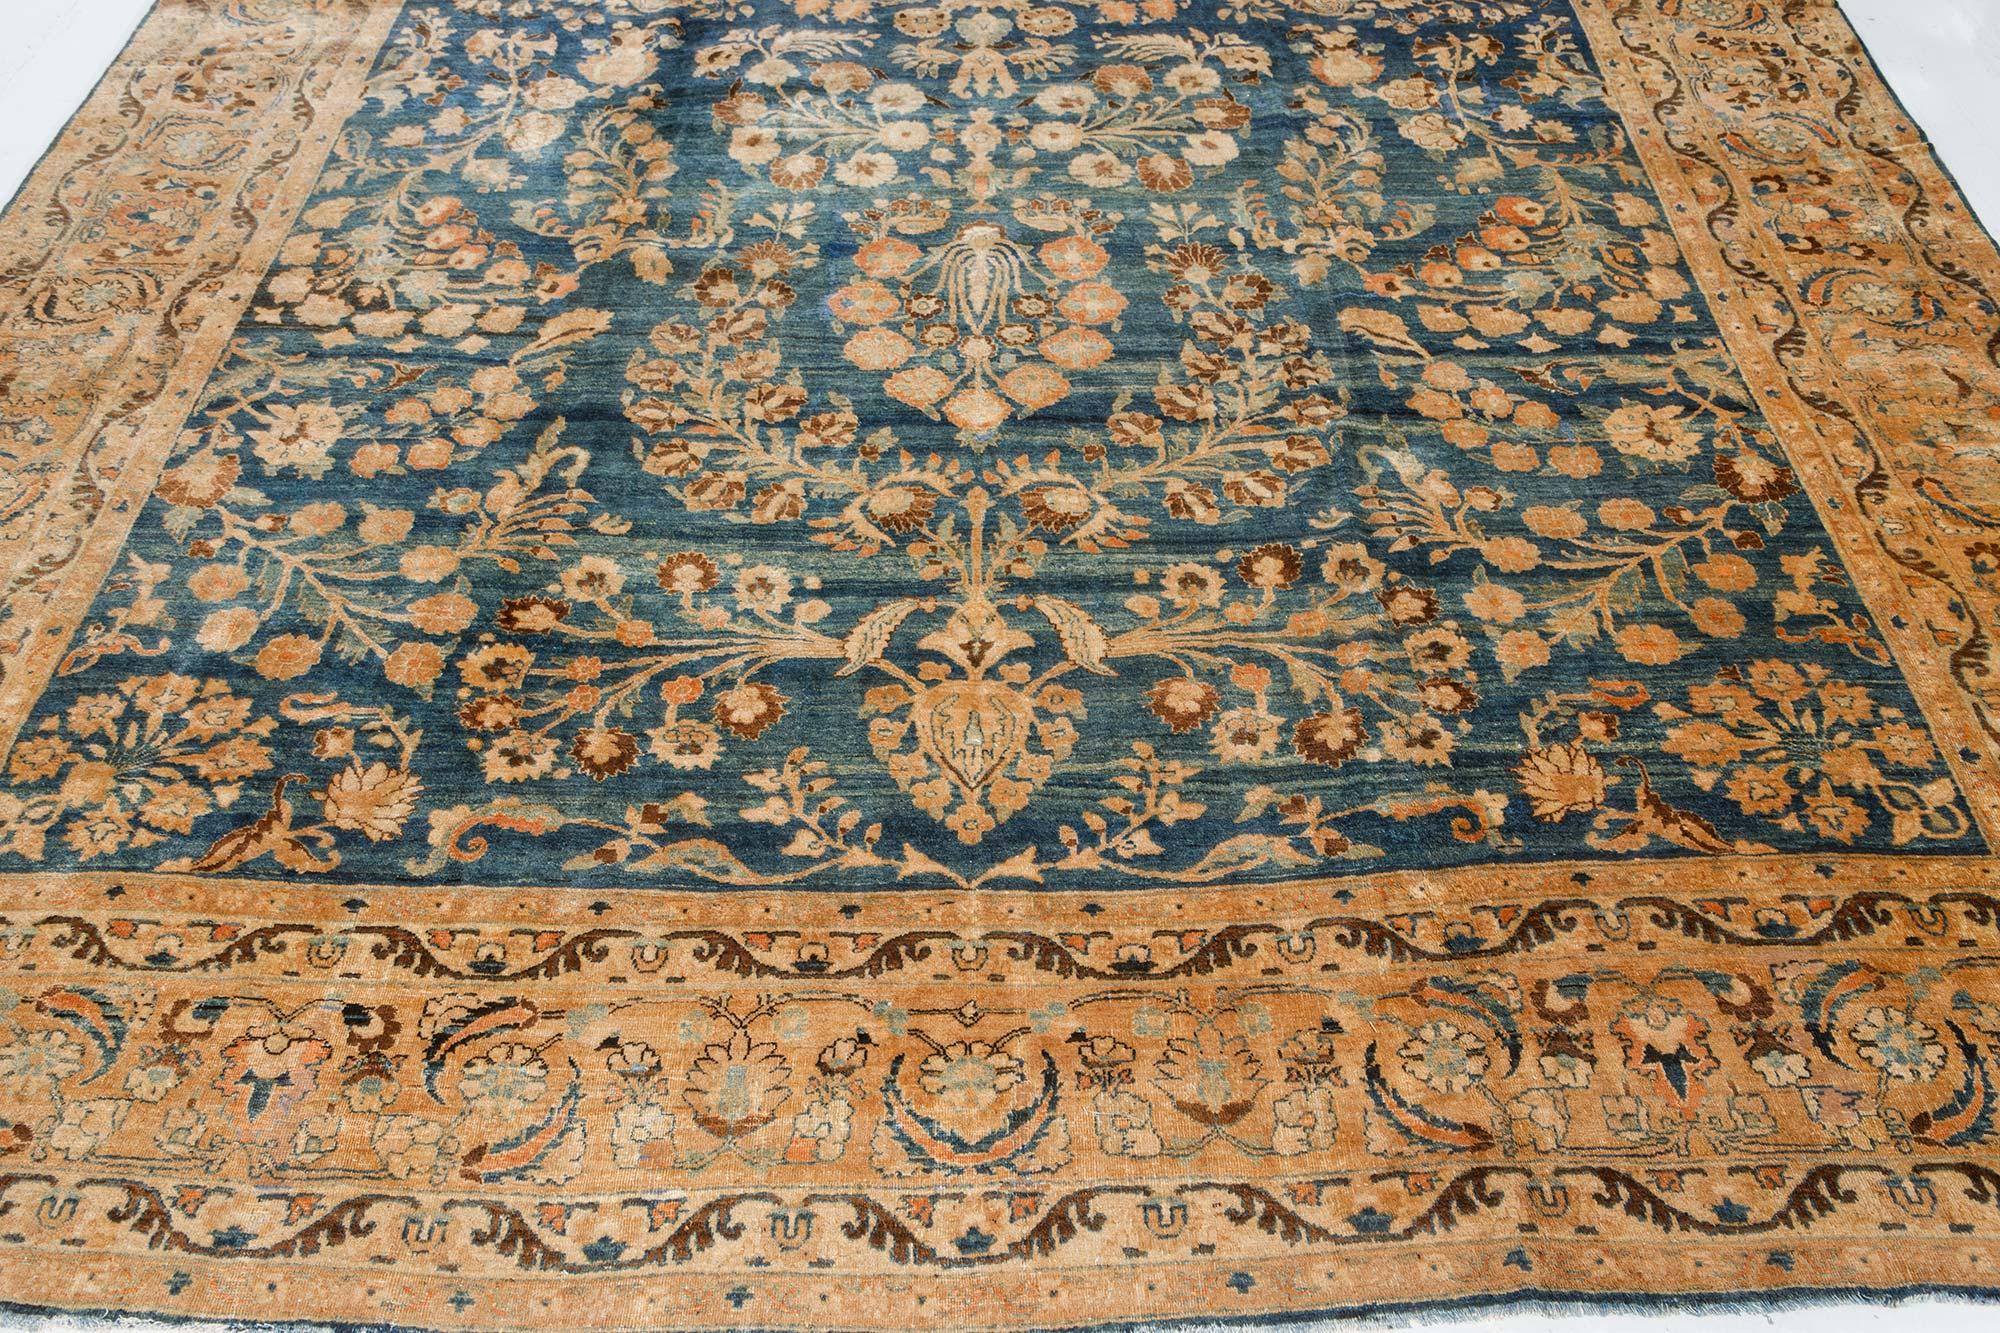 Early 20th Century Persian Khorassan Blue Handmade Wool Carpet For Sale 1